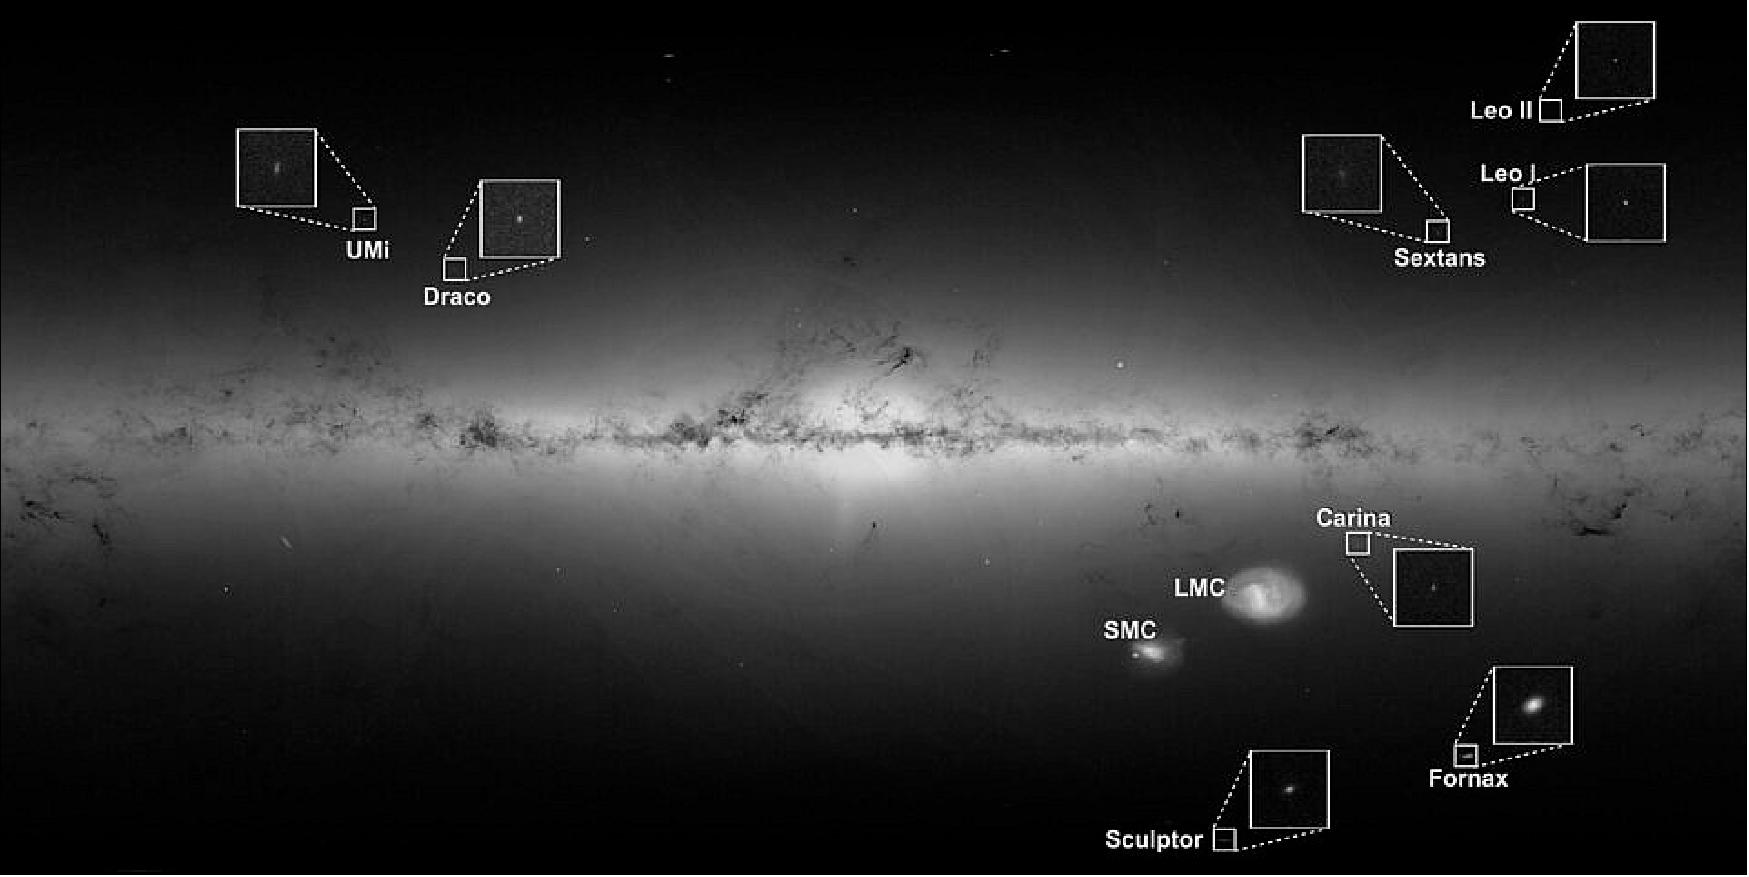 Figure 39: Our galaxy, the Milky Way, is surrounded by about fifty dwarf galaxies. Most of these galaxies are only identifiable through telescopes and have been named after the constellation in which they appear on the sky (for example, Draco, Sculptor or Leo). However, the two most obvious dwarf galaxies are called the Large Magellanic Cloud (LMC) and the Small Magellanic Cloud (SMC), and these are easily visible to the unaided eye. Traditionally these dwarf galaxies have been thought of as satellites in orbit around the Milky Way for many billions of years. Now, however, new data from ESA’s Gaia spacecraft have shown that the majority of the dwarf galaxies are passing the Milky Way for the first time. This forces astronomers to reconsider the history of the Milky Way and how it formed, along with the nature and composition of the dwarf galaxies themselves (image credit: ESA/Gaia/DPAC, CC BY-SA 3.0 IGO)